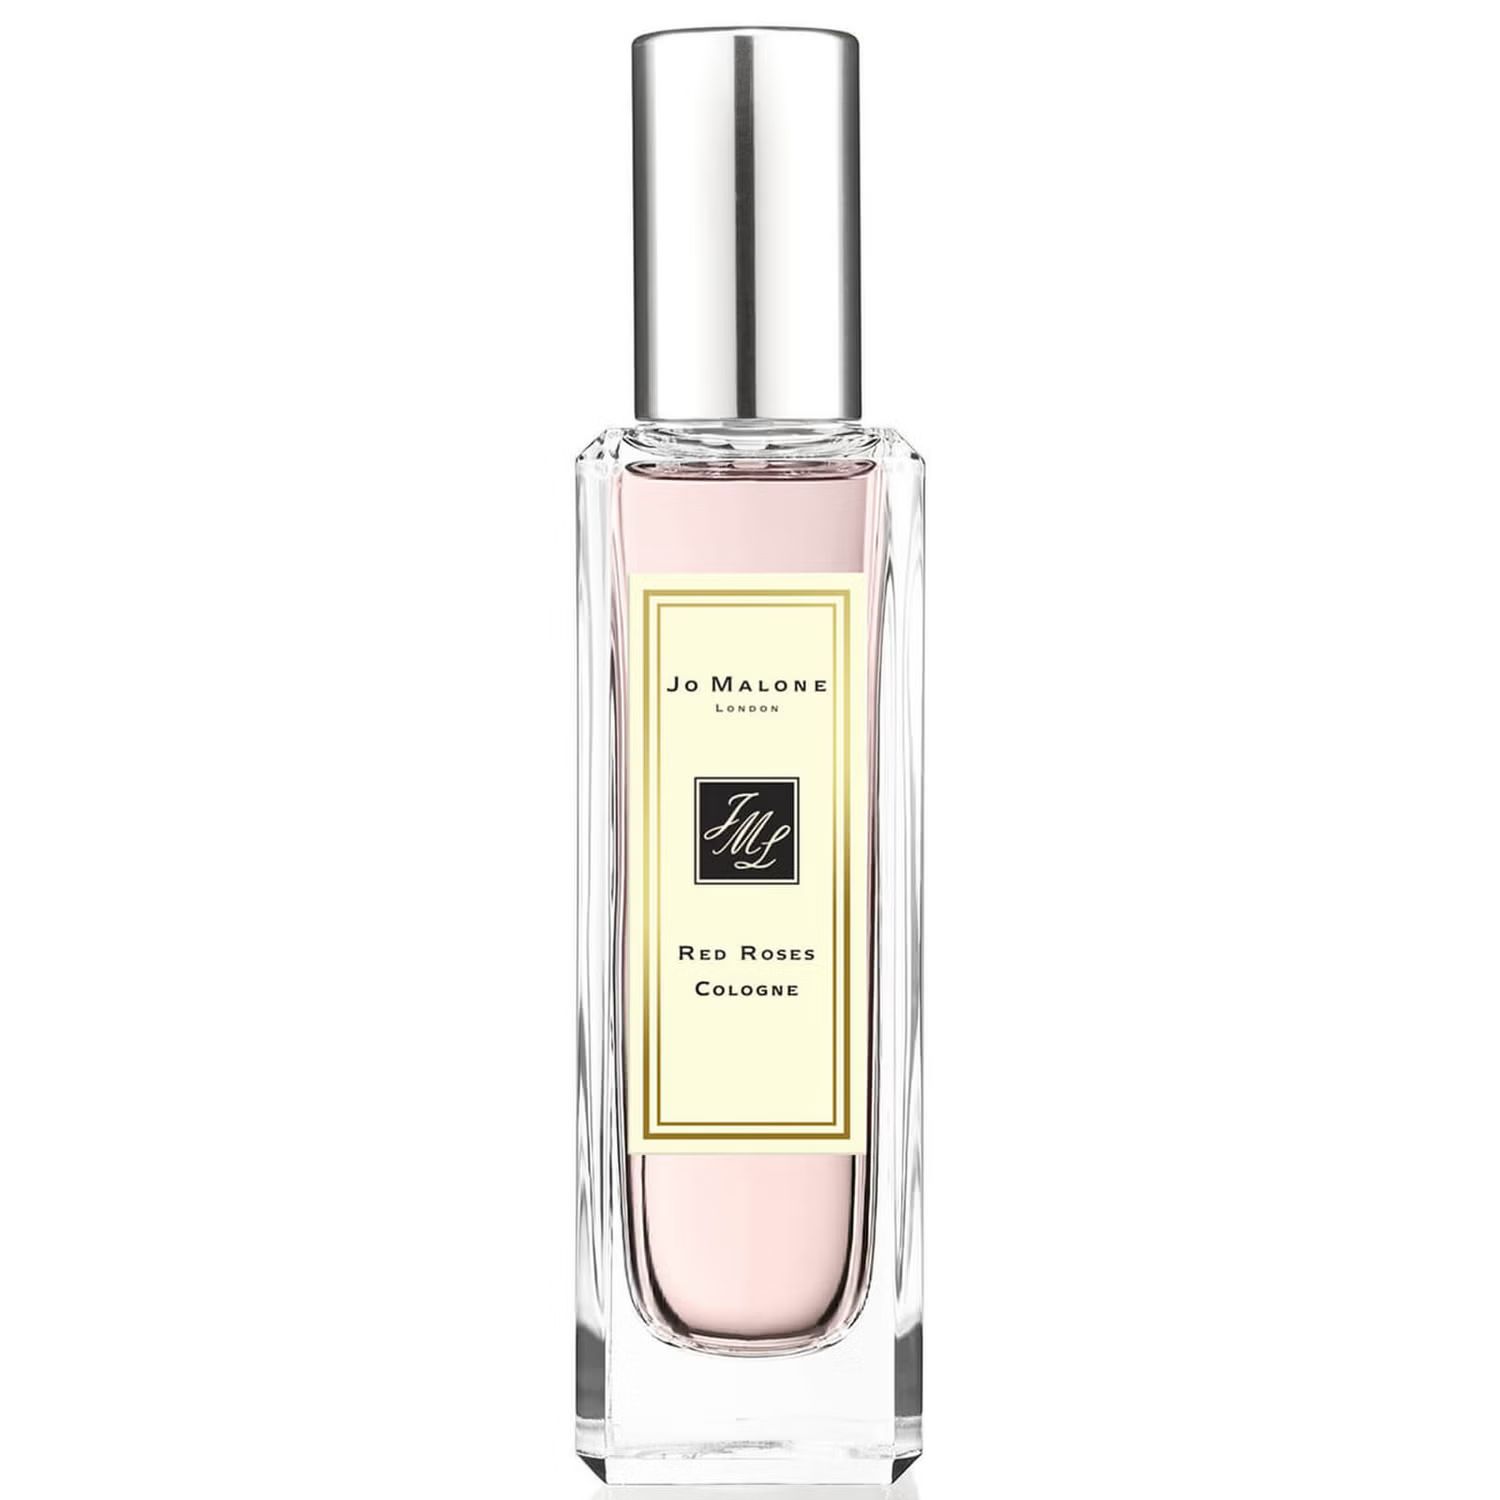 Jo Malone London Red Roses Cologne - 30ml | Look Fantastic (ROW)